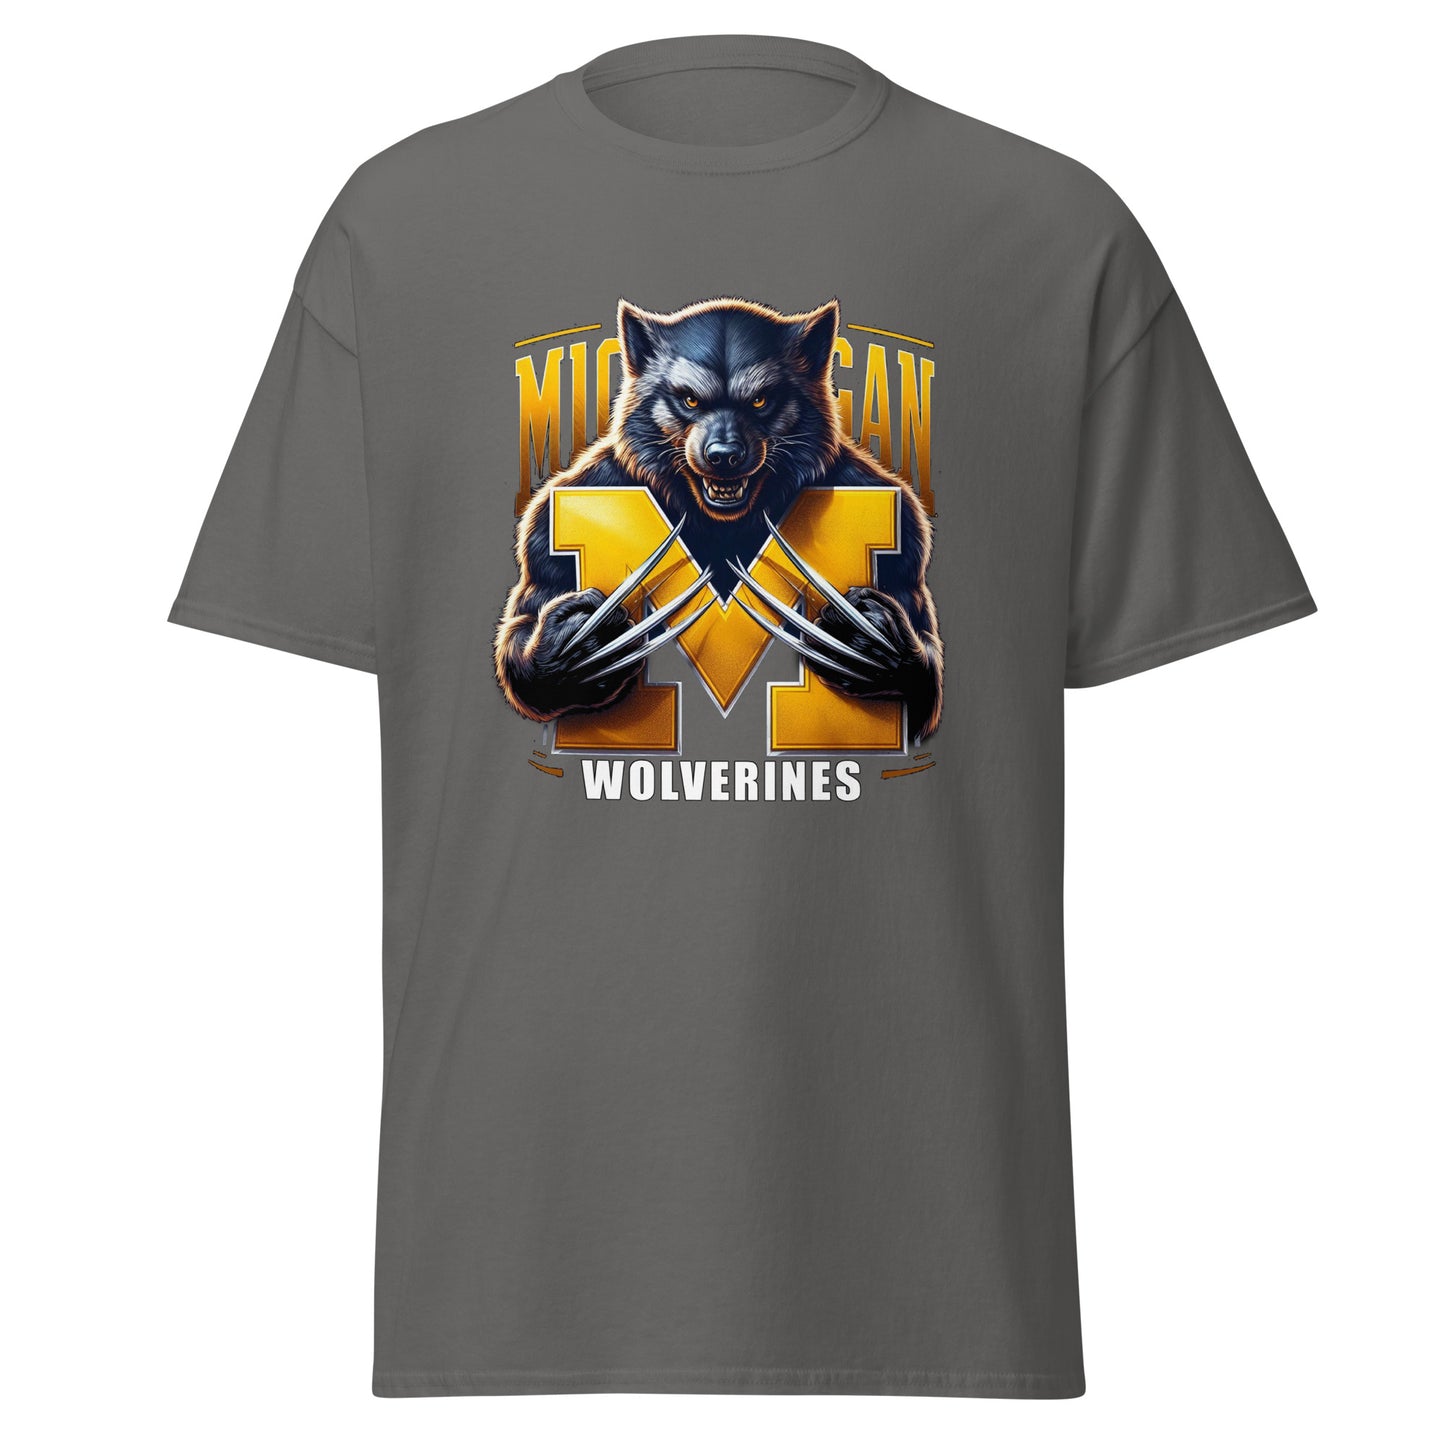 Show Your Team Spirit with Stylish Michigan Wolverines T-Shirts